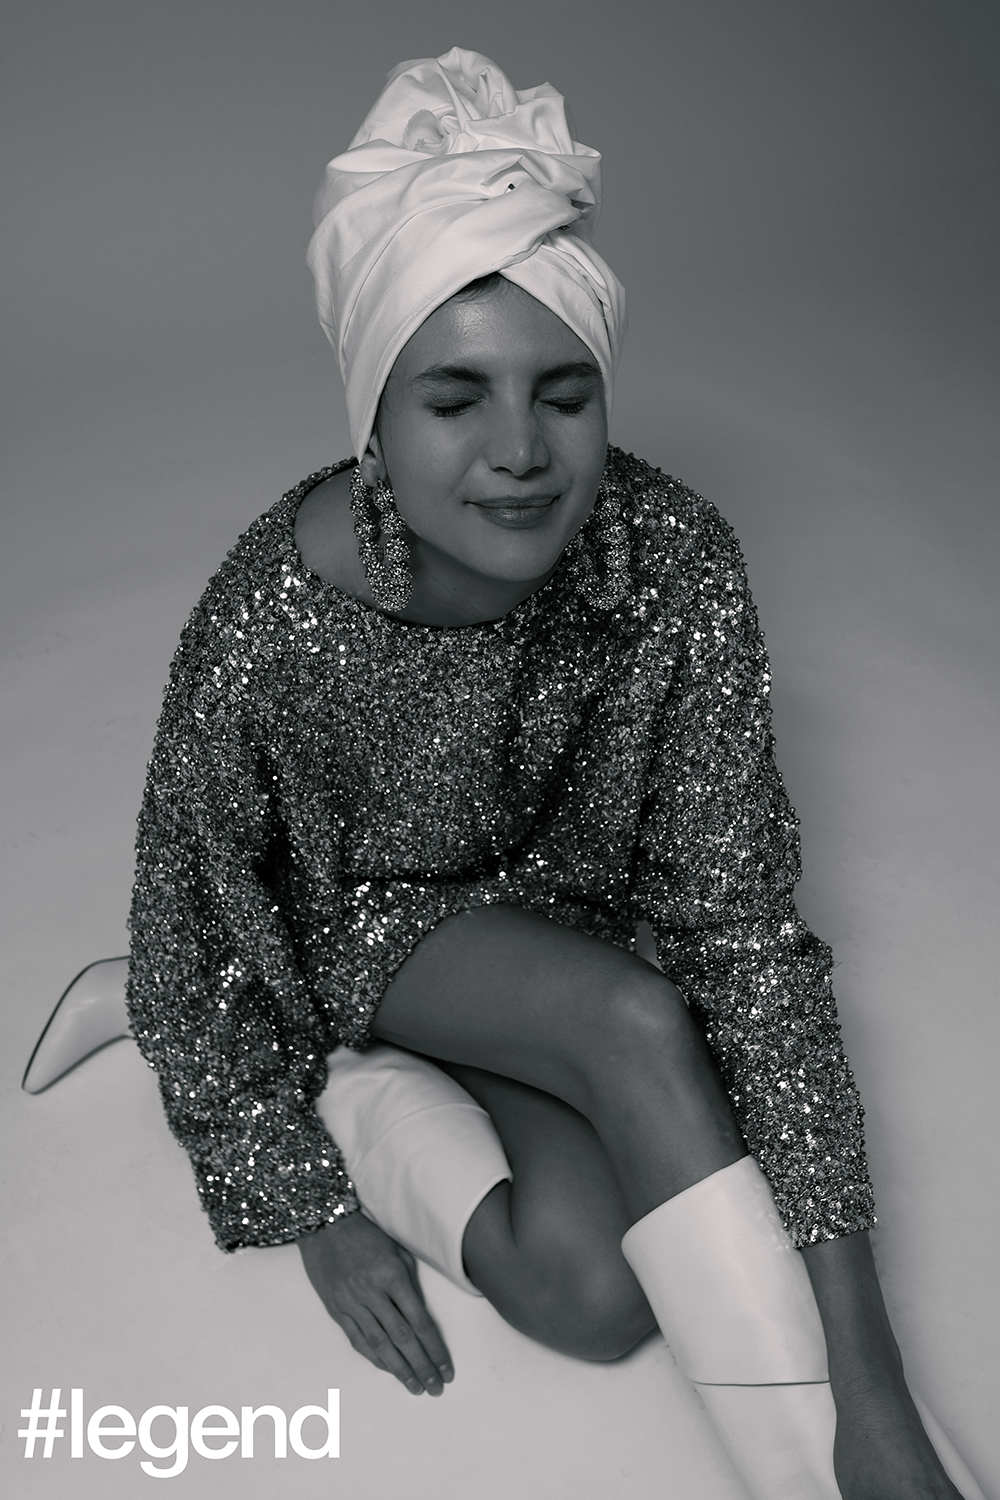 Silver sequinned mini dress_Isabel Marant; White slouchy boots_Givenchy; Silver oversized hoops earrings_Tom Ford; Turban stylist's own